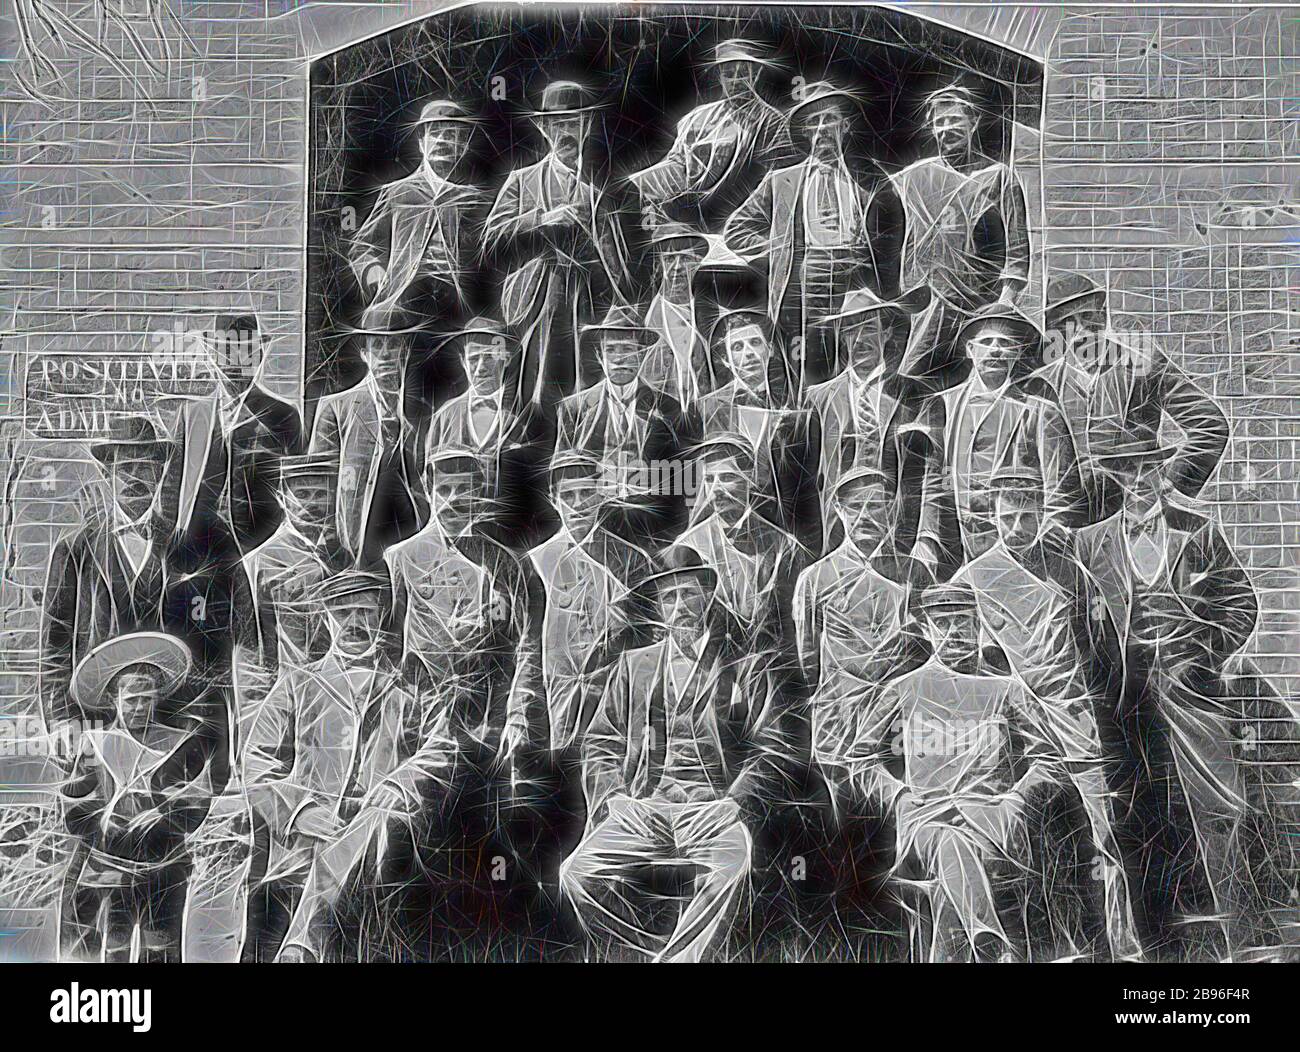 Negative - Bendigo, Victoria, circa 1905, A group of workers from the Bendigo tram system., Reimagined by Gibon, design of warm cheerful glowing of brightness and light rays radiance. Classic art reinvented with a modern twist. Photography inspired by futurism, embracing dynamic energy of modern technology, movement, speed and revolutionize culture. Stock Photo